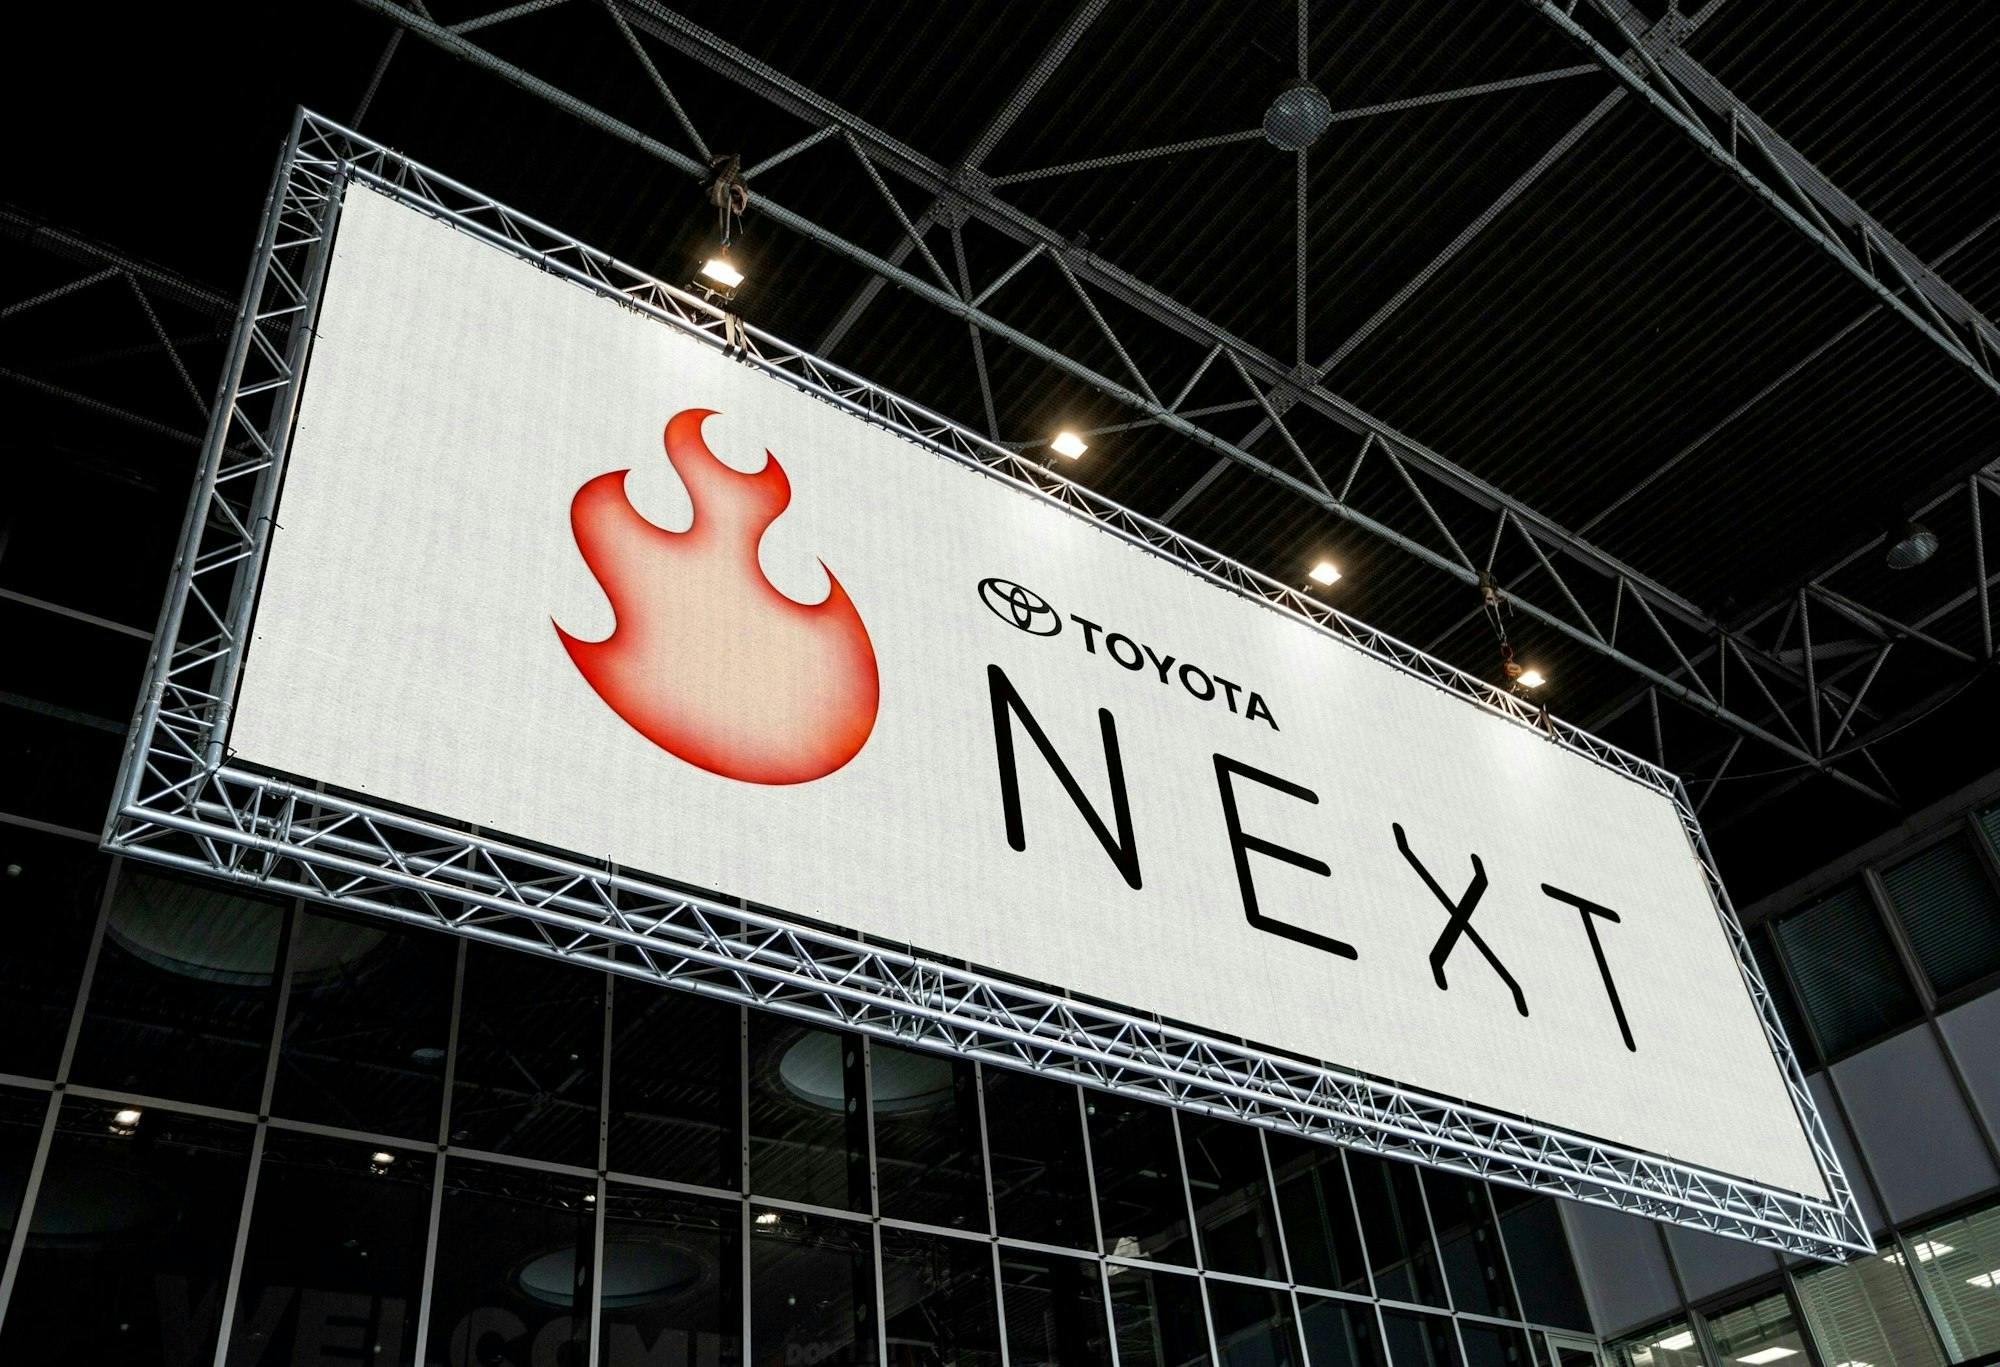 Large outdoor banner containing Toyota Next logo